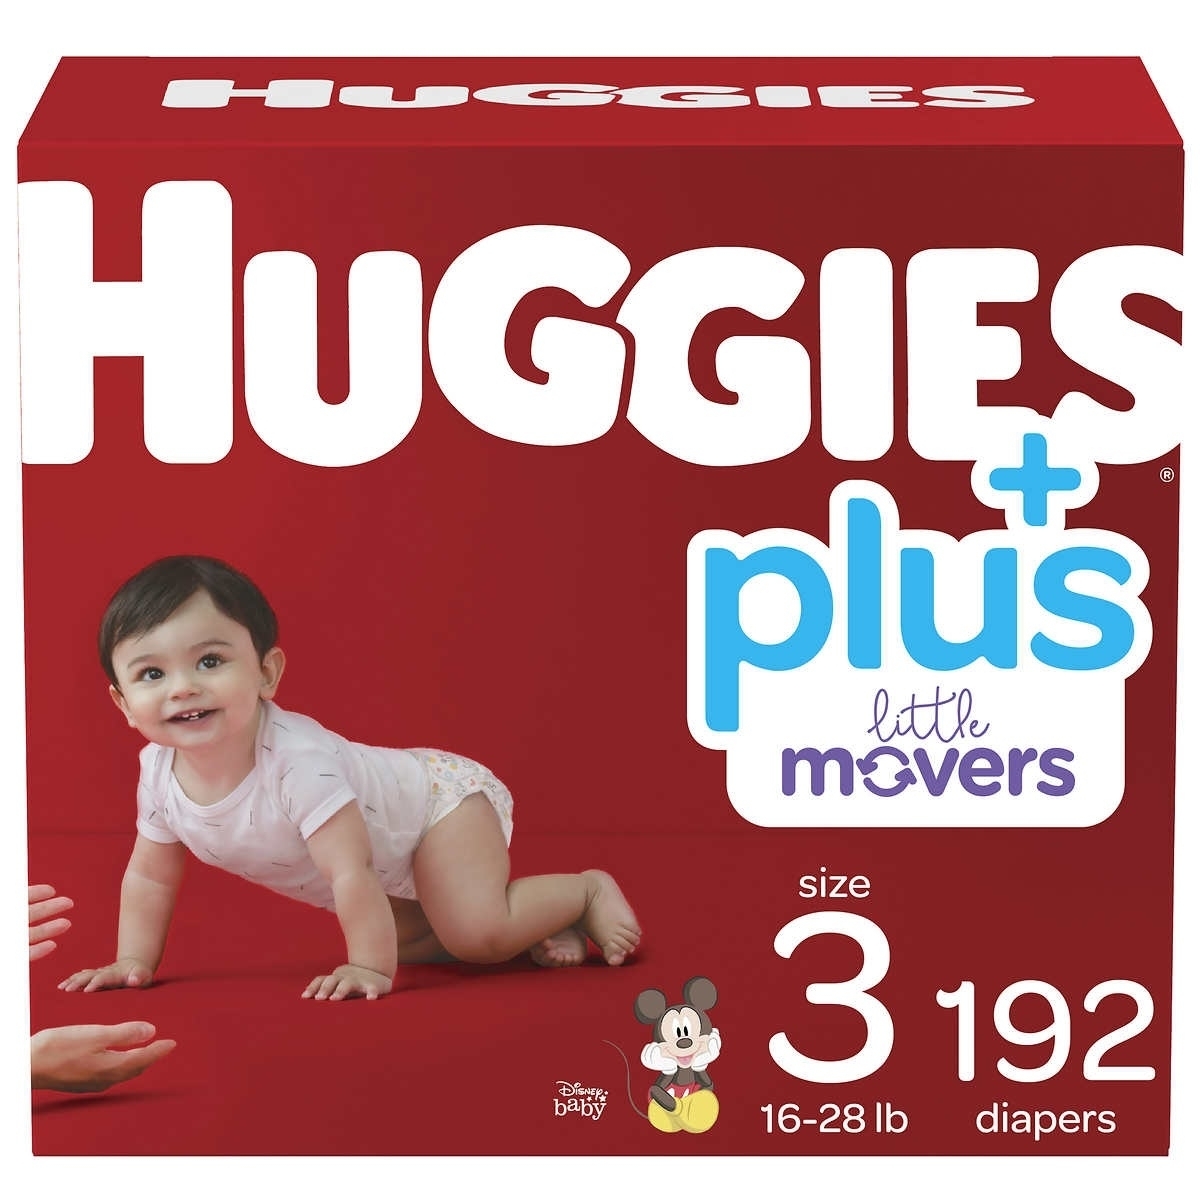 Huggies Plus Diapers, Size 3 (16-28 Pounds), 192 Count